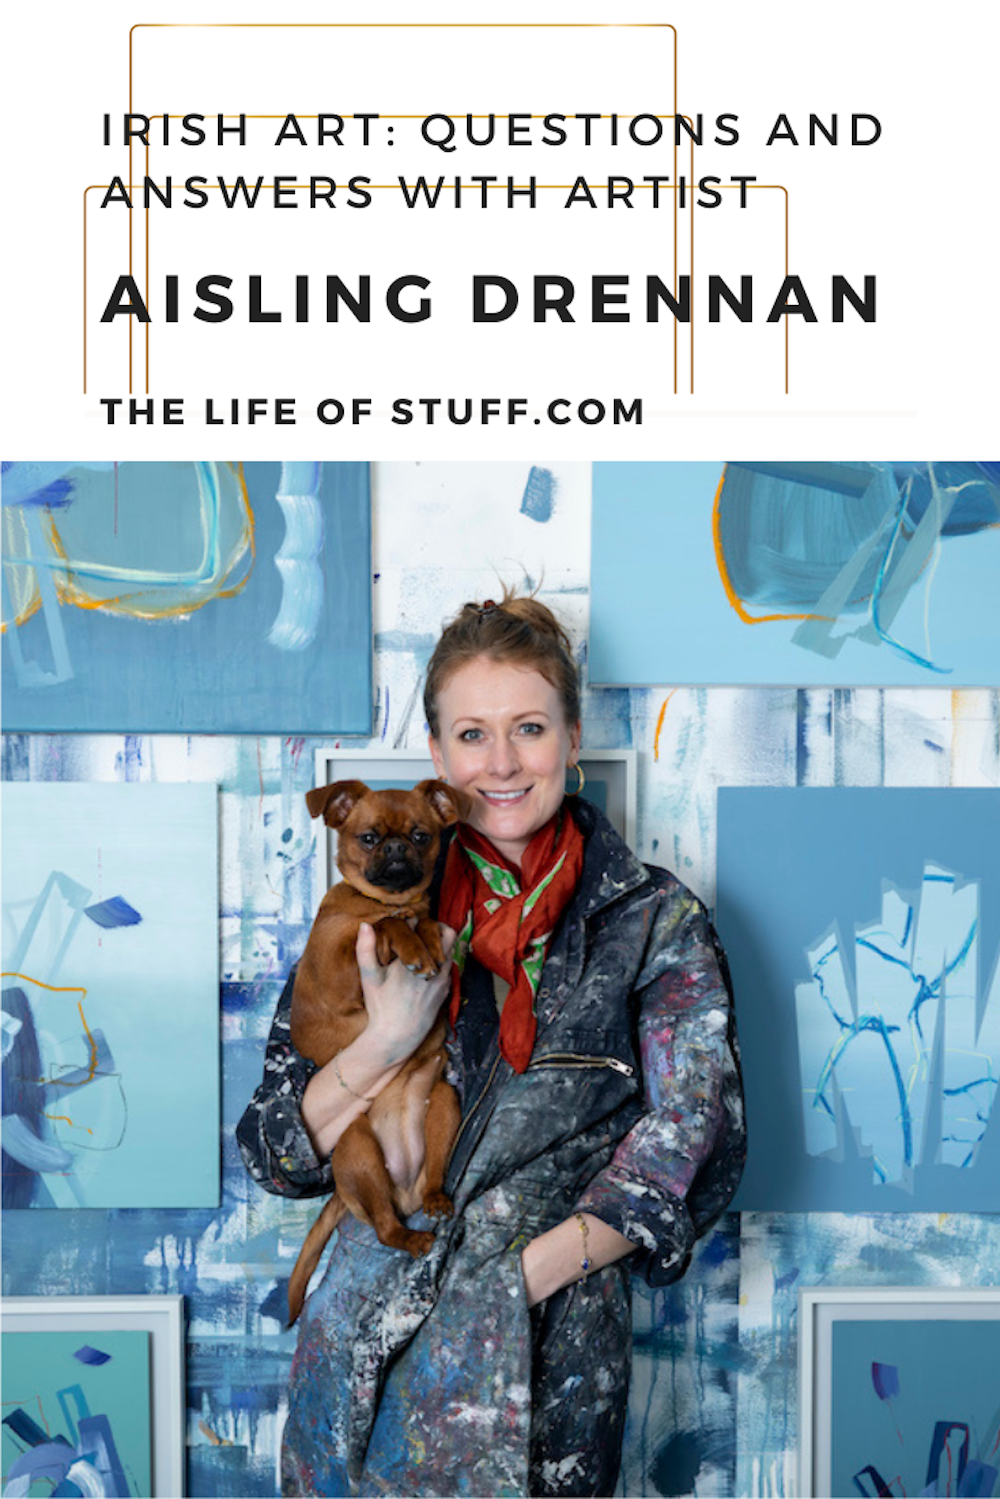 Irish Art - Questions and Answers with Artist Aisling Drennan - The Life of Stuff